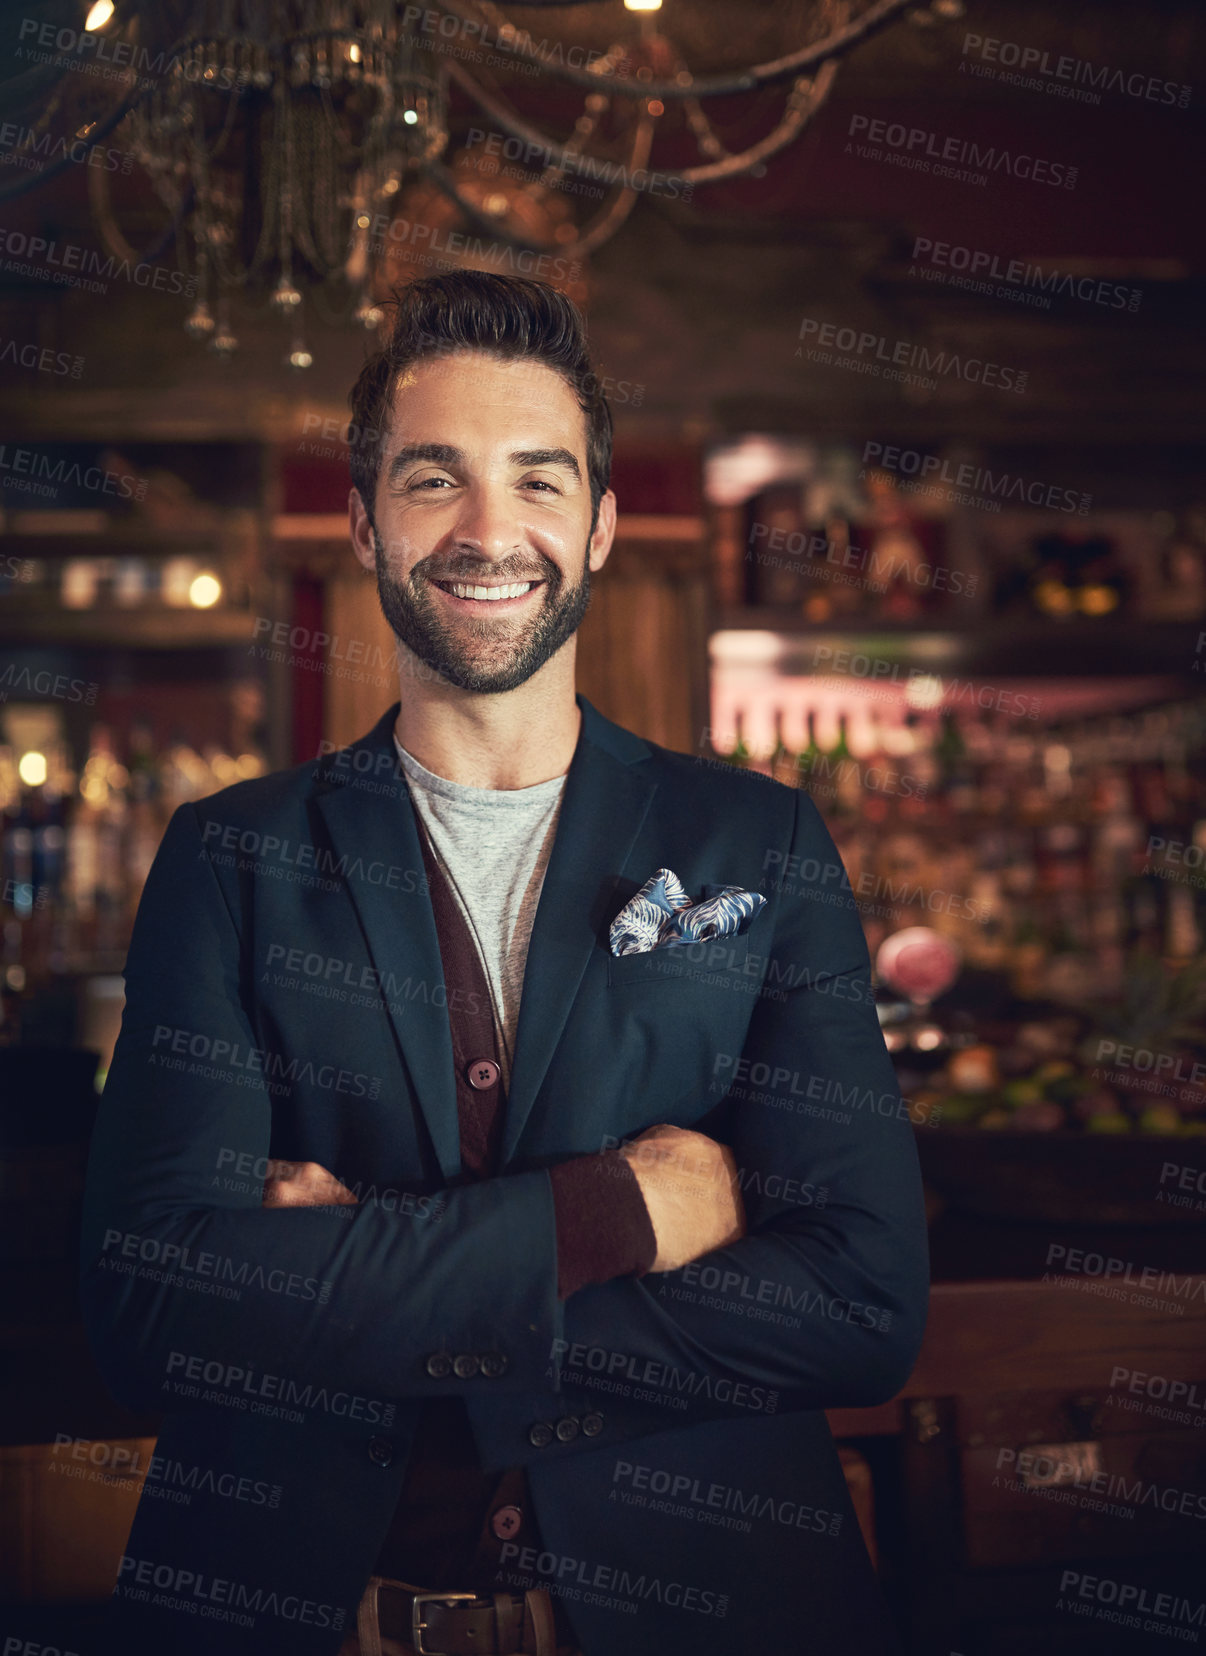 Buy stock photo Cropped portrait of a young man standing in a bar